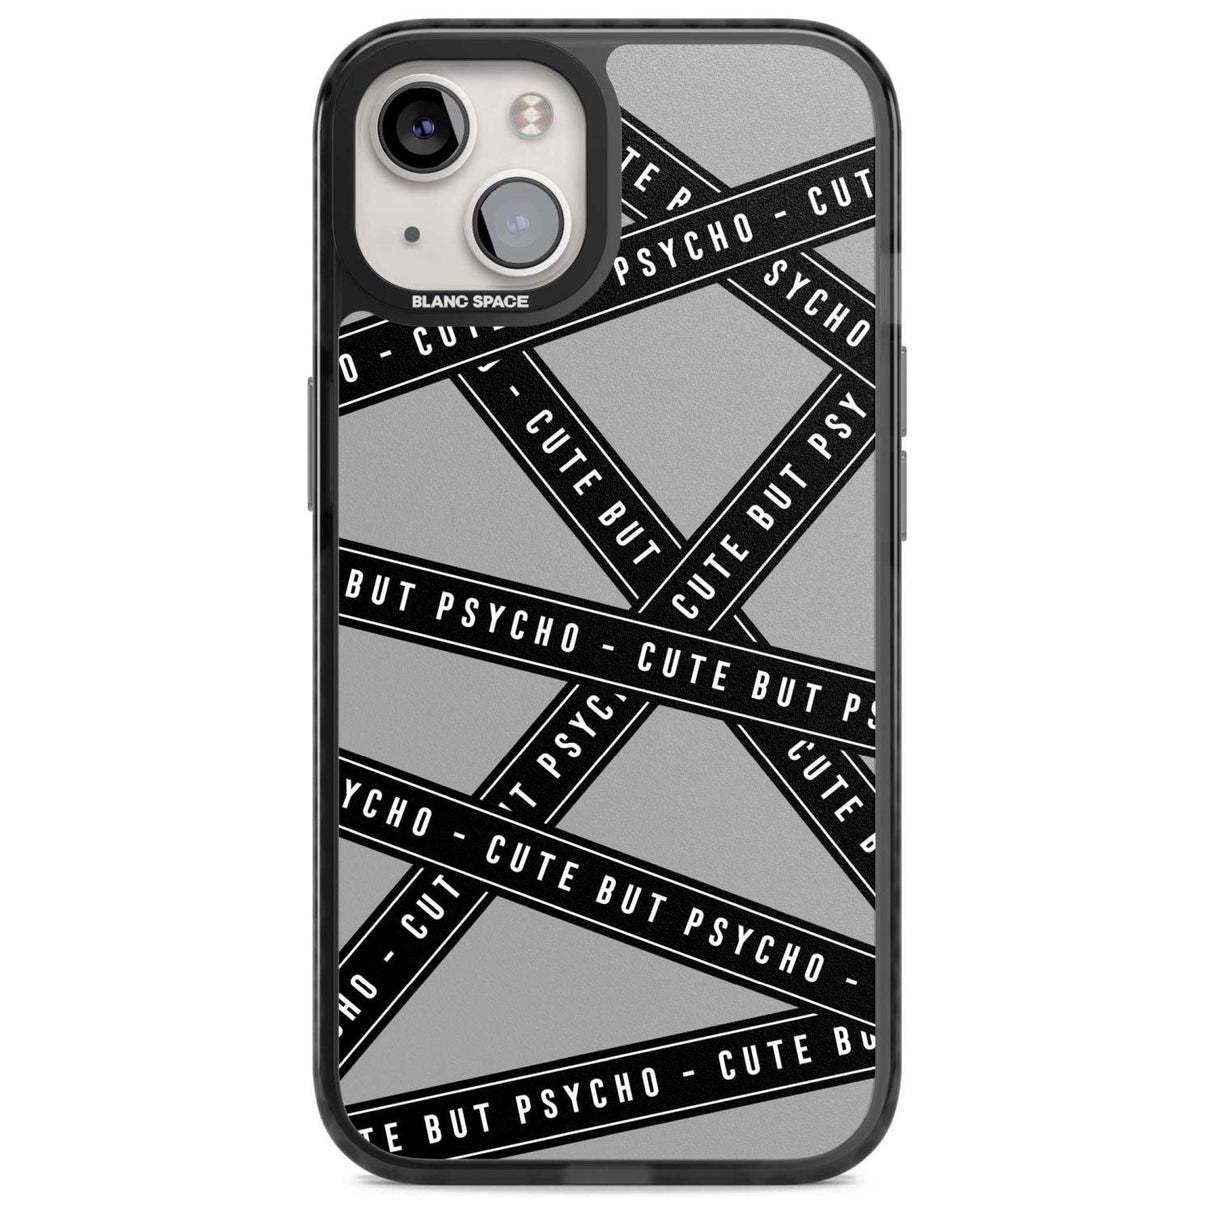 Caution Tape Phrases Cute But Psycho Phone Case iPhone 15 Plus / Magsafe Black Impact Case,iPhone 15 / Magsafe Black Impact Case,iPhone 14 Plus / Magsafe Black Impact Case,iPhone 14 / Magsafe Black Impact Case,iPhone 13 / Magsafe Black Impact Case Blanc Space